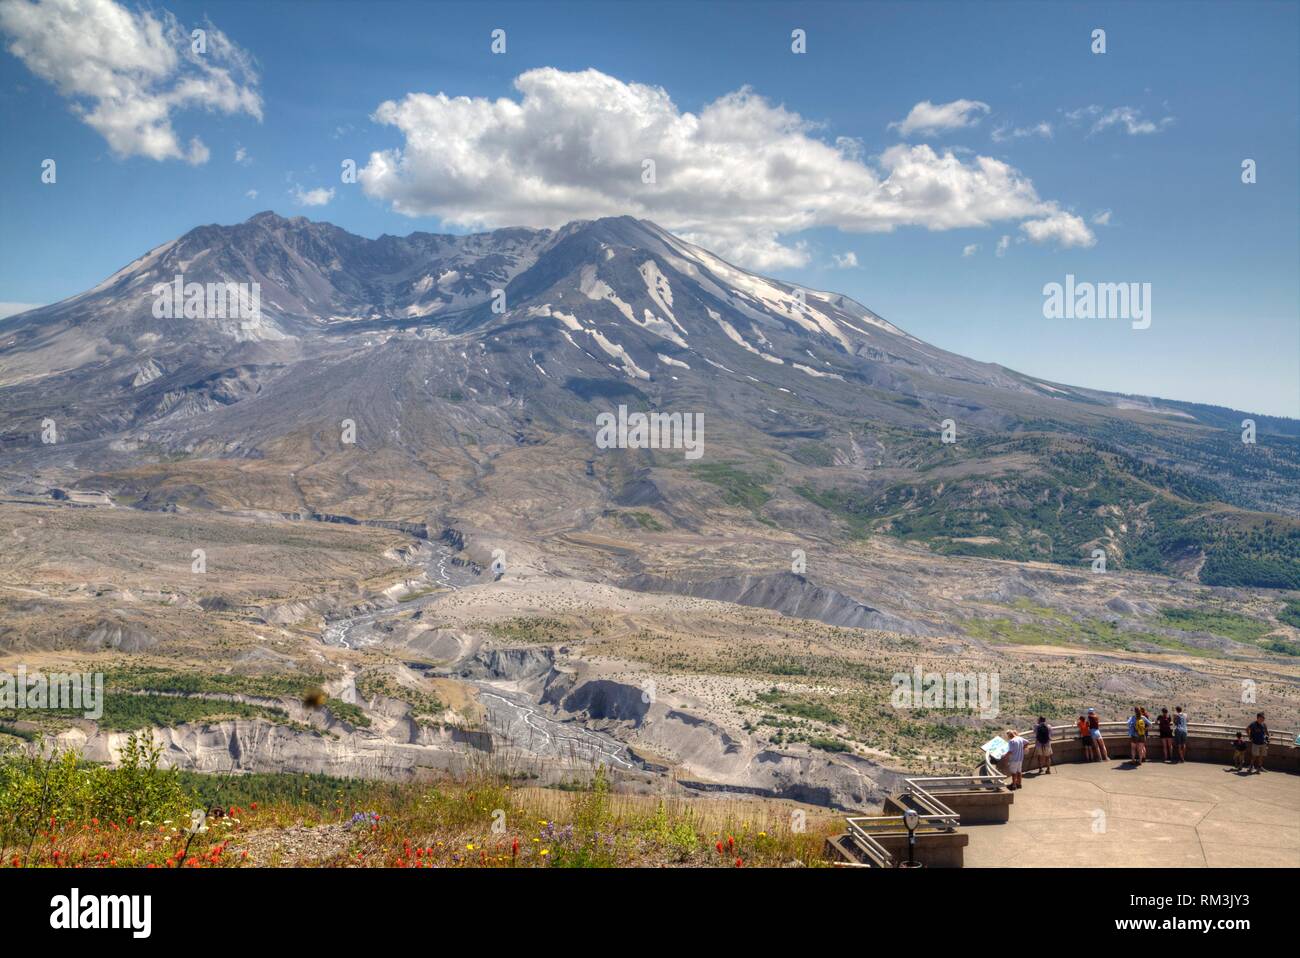 Tourists Viewing Mt St Helens, Mt St Helens National Volcanic Monument, Washington, USA Stock Photo